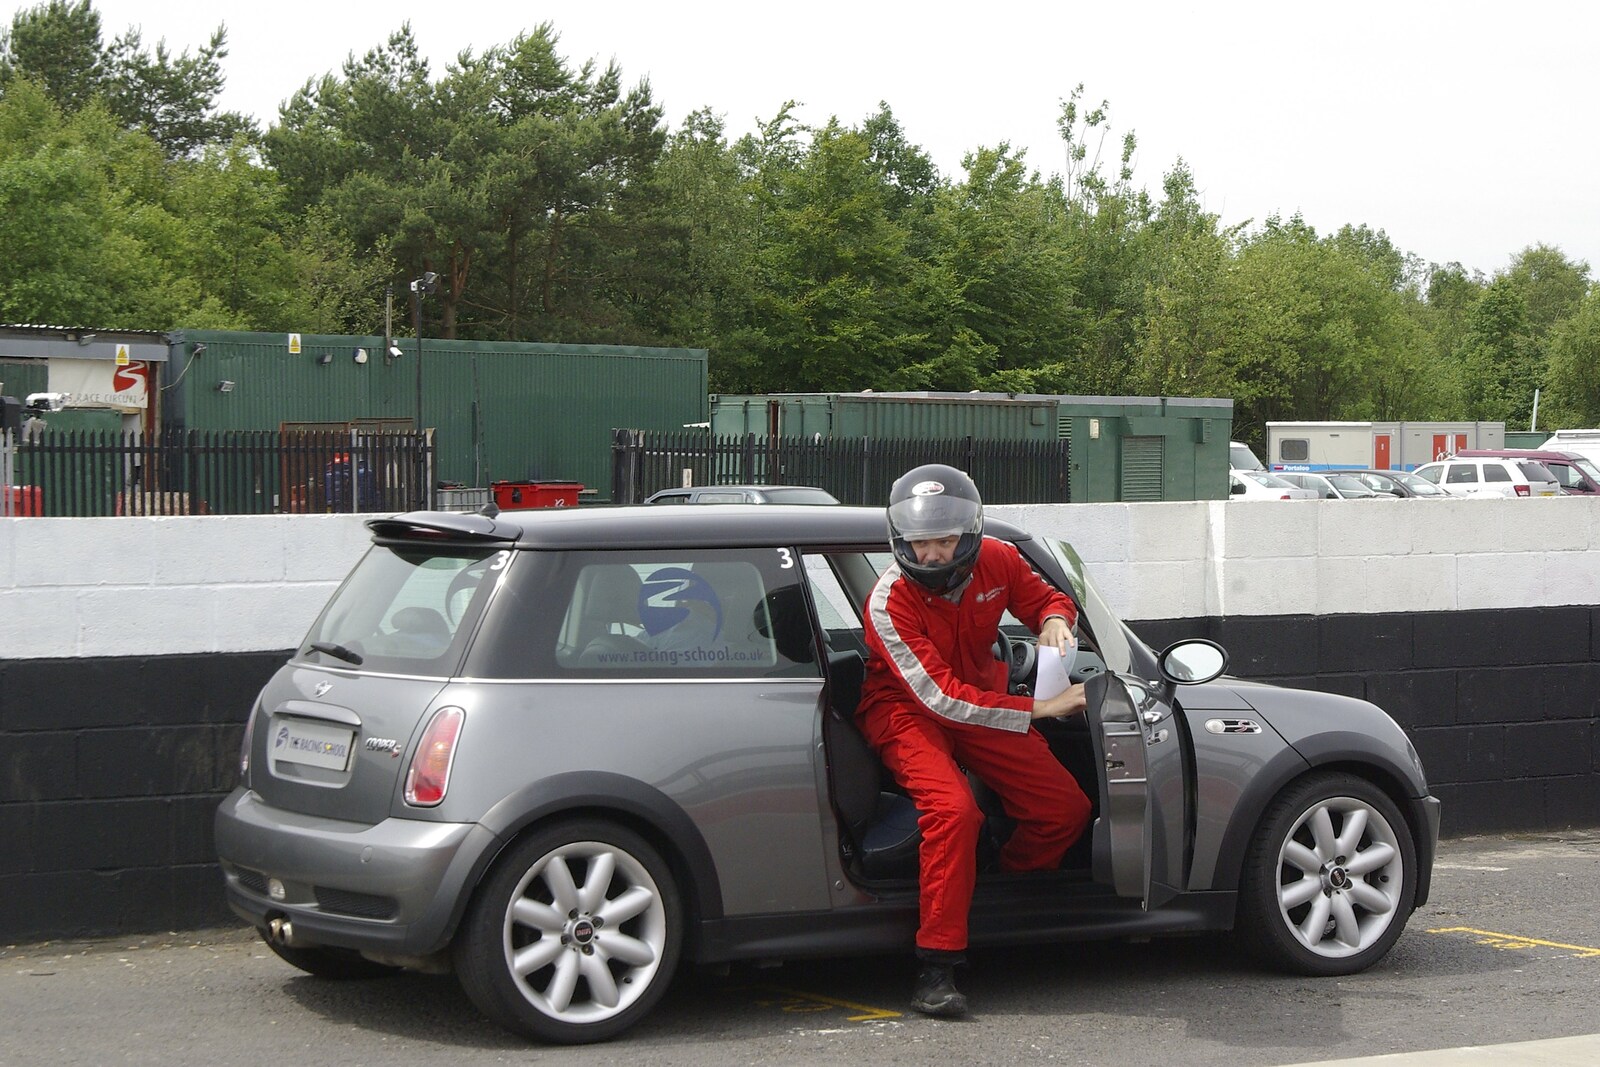 Driving a Racing Car, Three Sisters Racetrack, Wigan, Lancashire - 24th June 2008: Nosher gets out of the Cooper S after the track recce